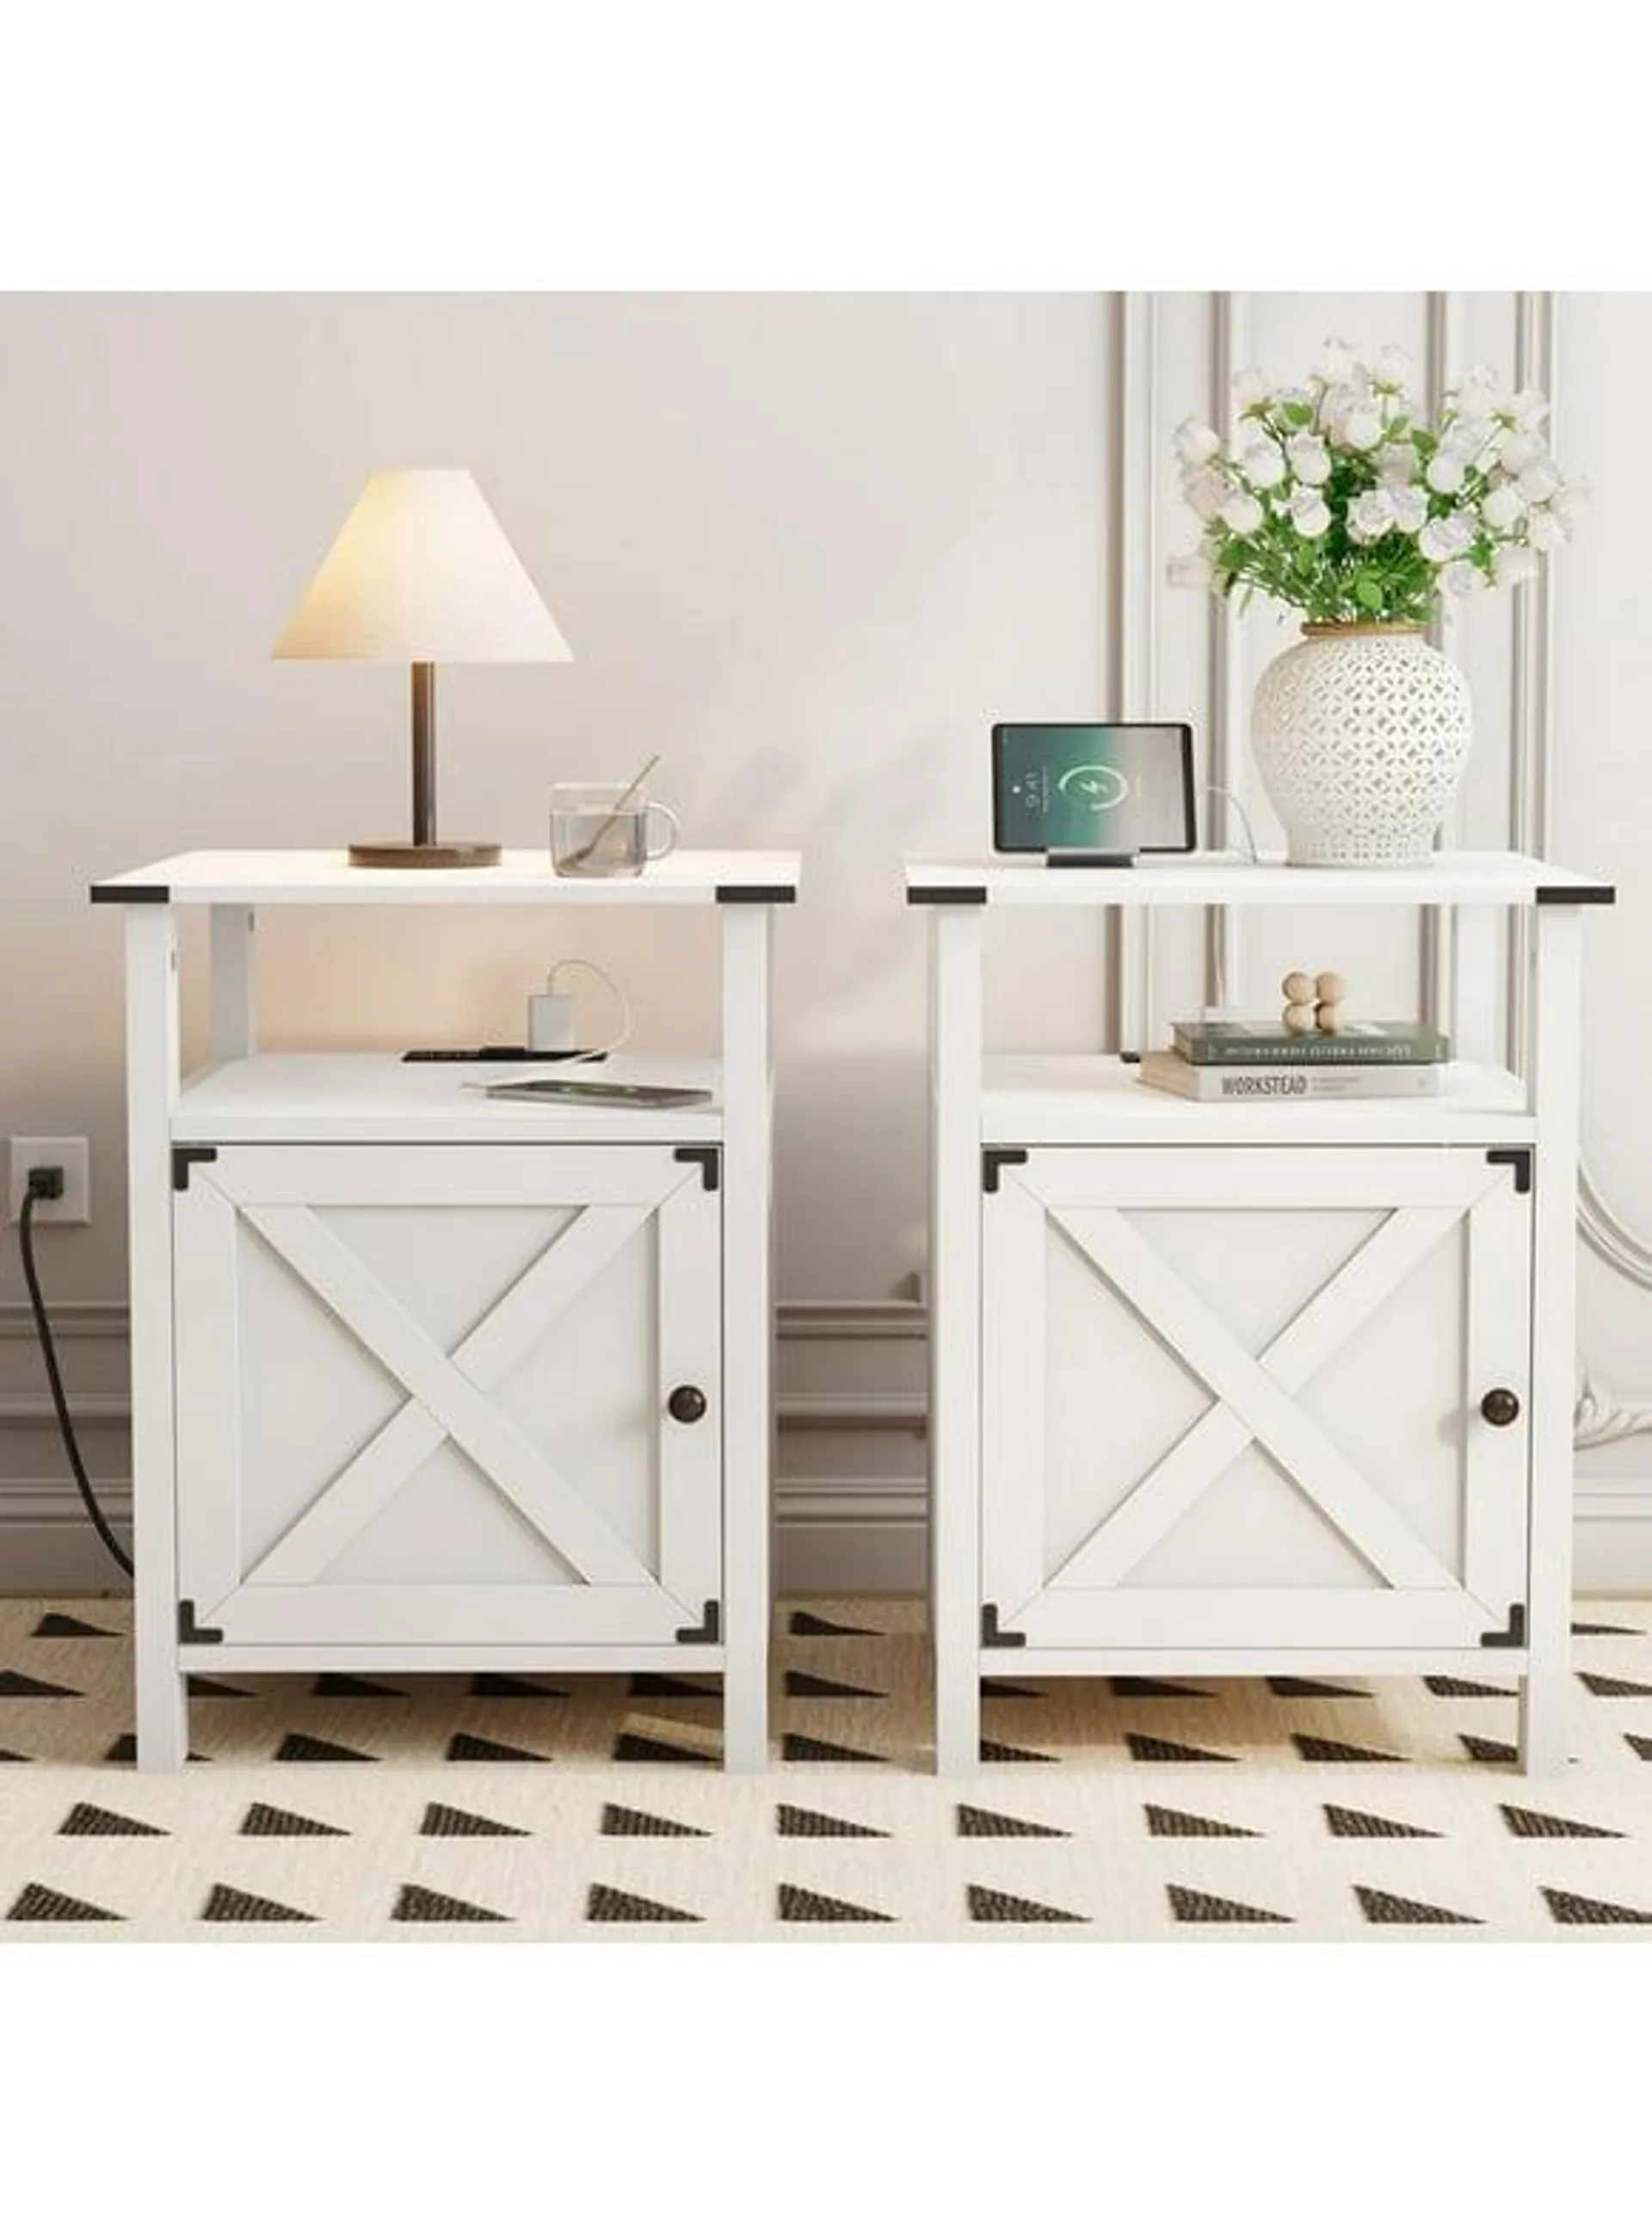 Behost Nightstand for Bedroom Set of 2, Farmhouse Small Bedside Table for Bedroom Furniture,White